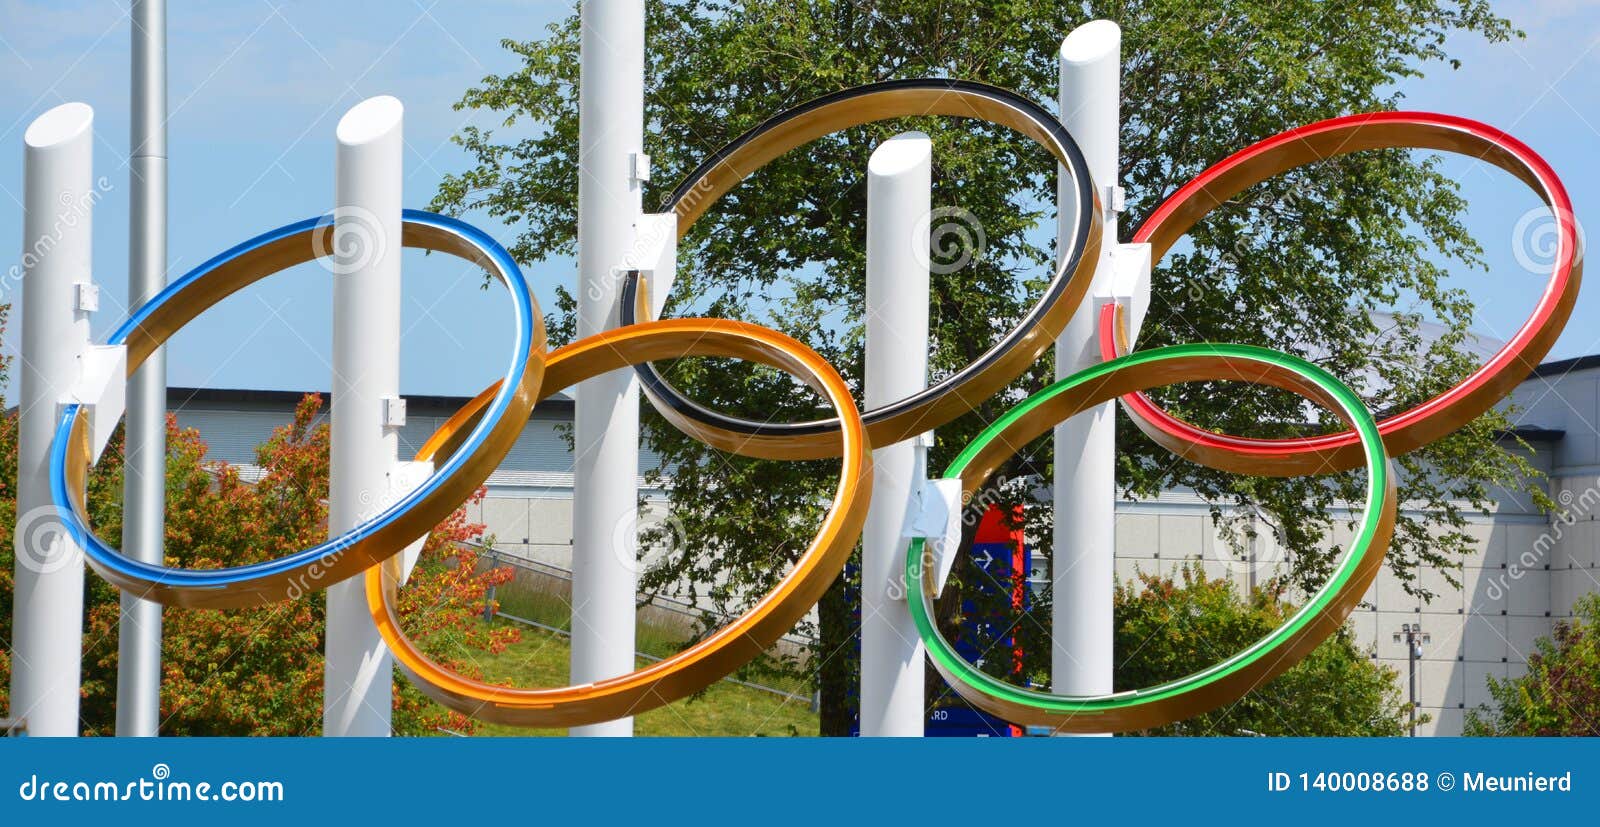 25 Outstanding Olympic Crafts for Kids to Make